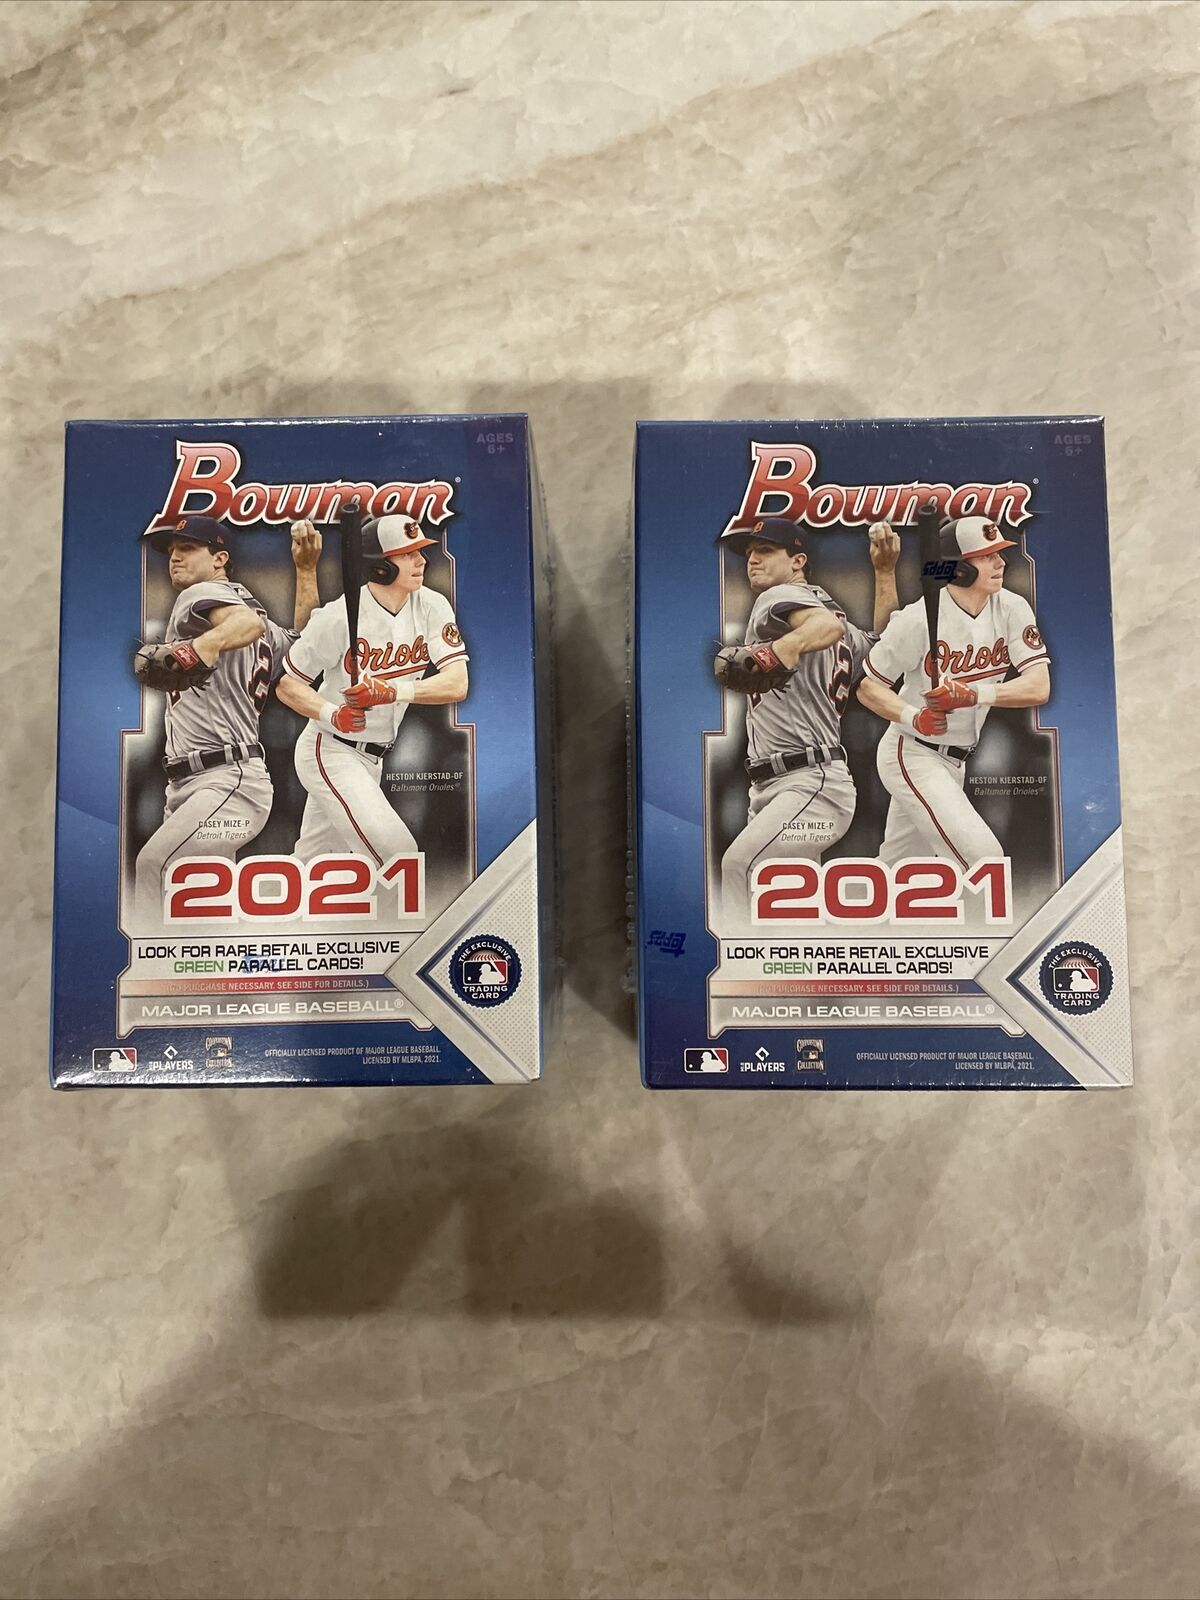 2021 Bowman Baseball Blaster Box lot of 2 boxes Factory Sealed Exclusive Green